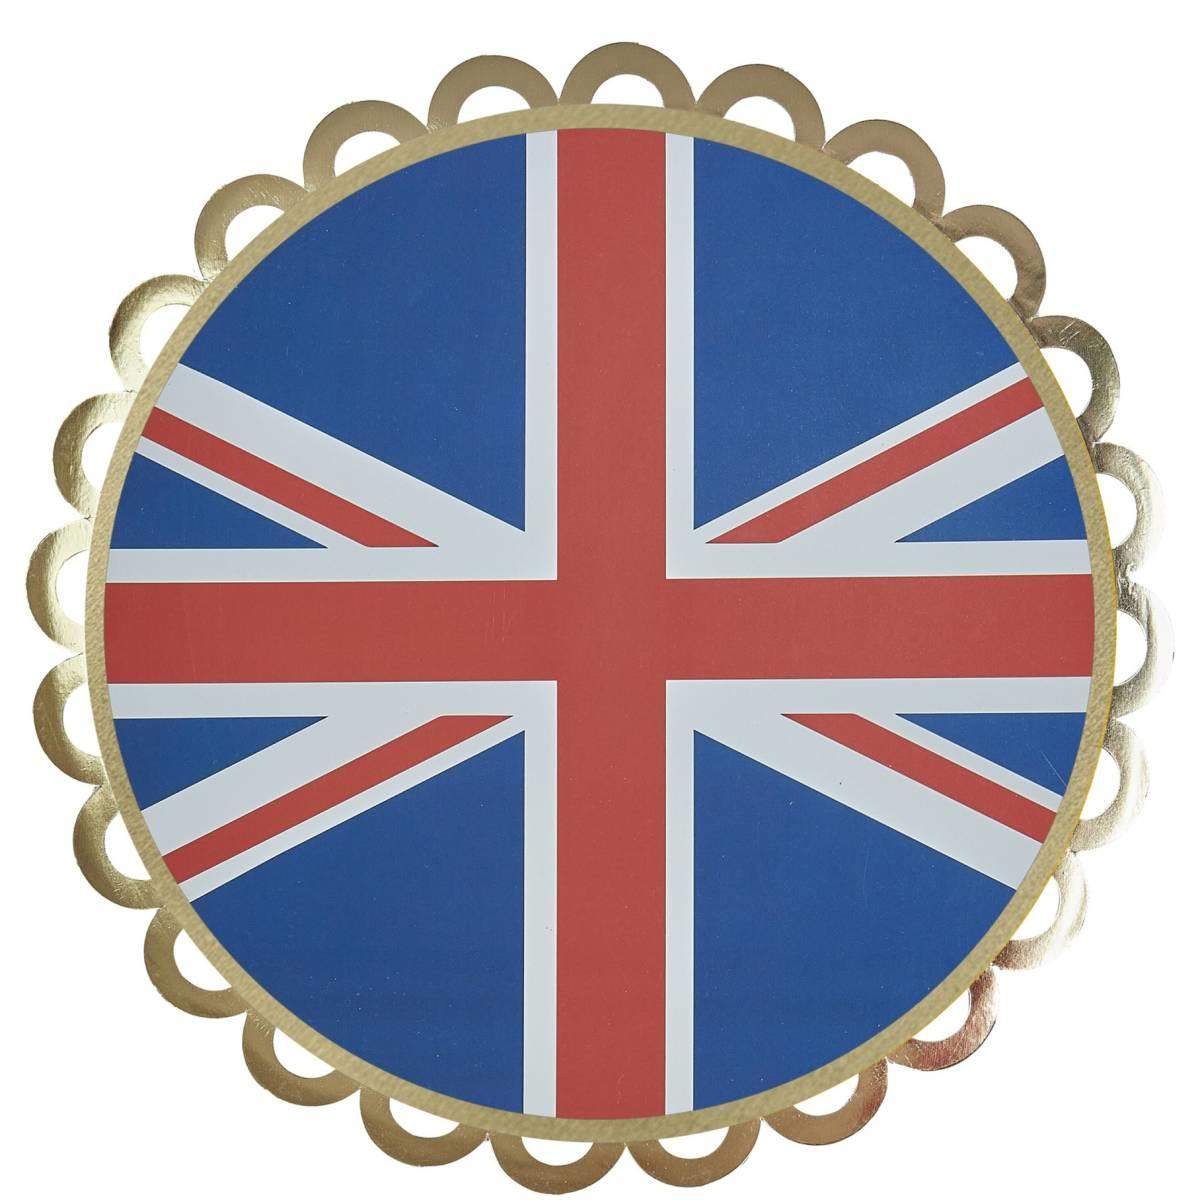 Deluxe Union Jack Party Plates with Gold Lattice Rim by Ginger Ray JBLE-100 available here at Karnival Costumes online party shop